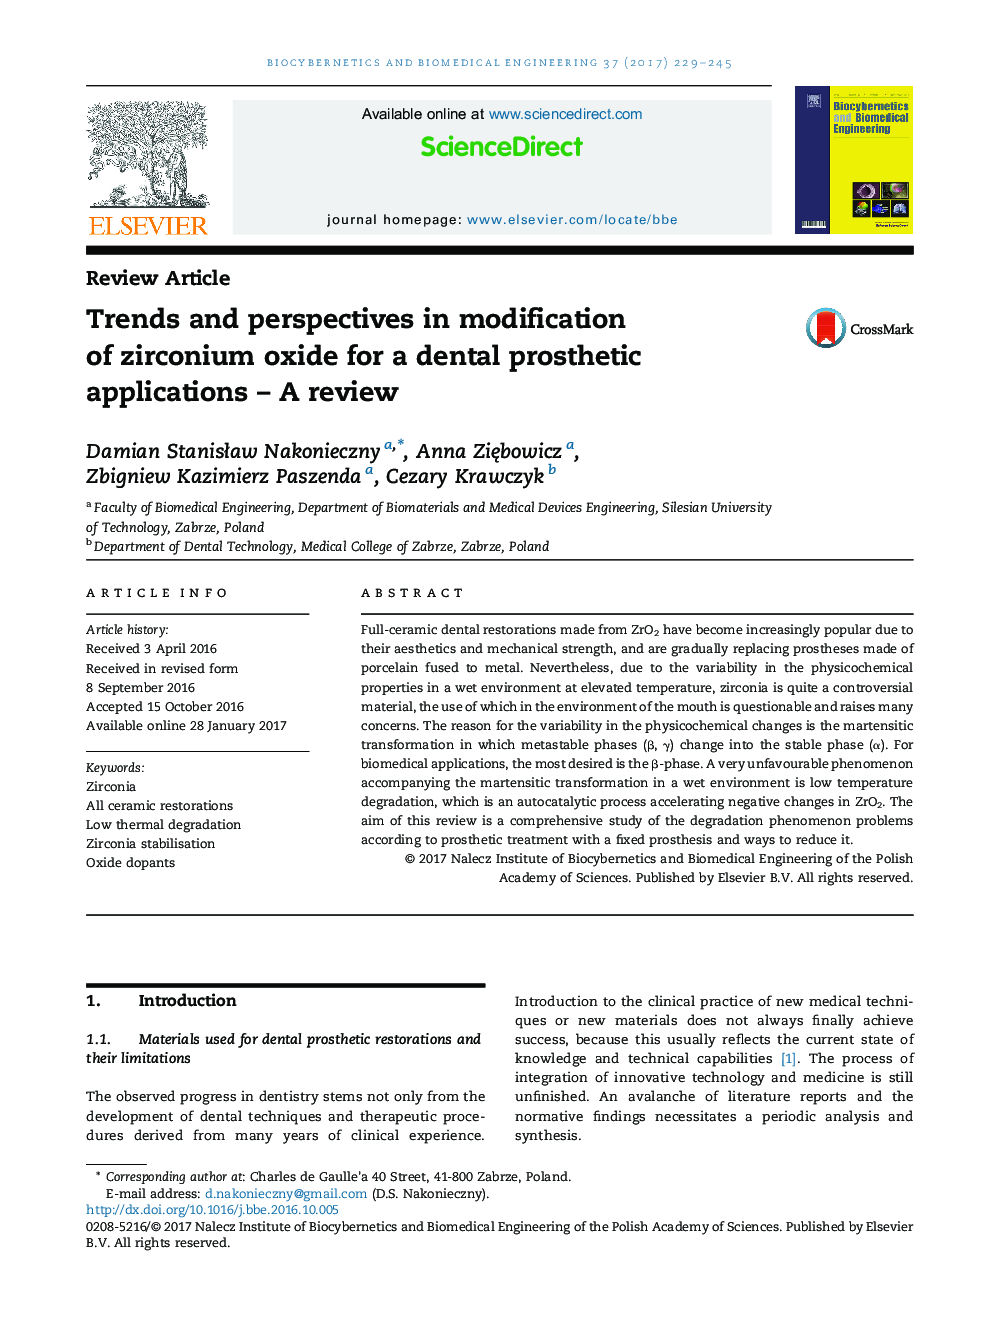 Trends and perspectives in modification of zirconium oxide for a dental prosthetic applications - A review